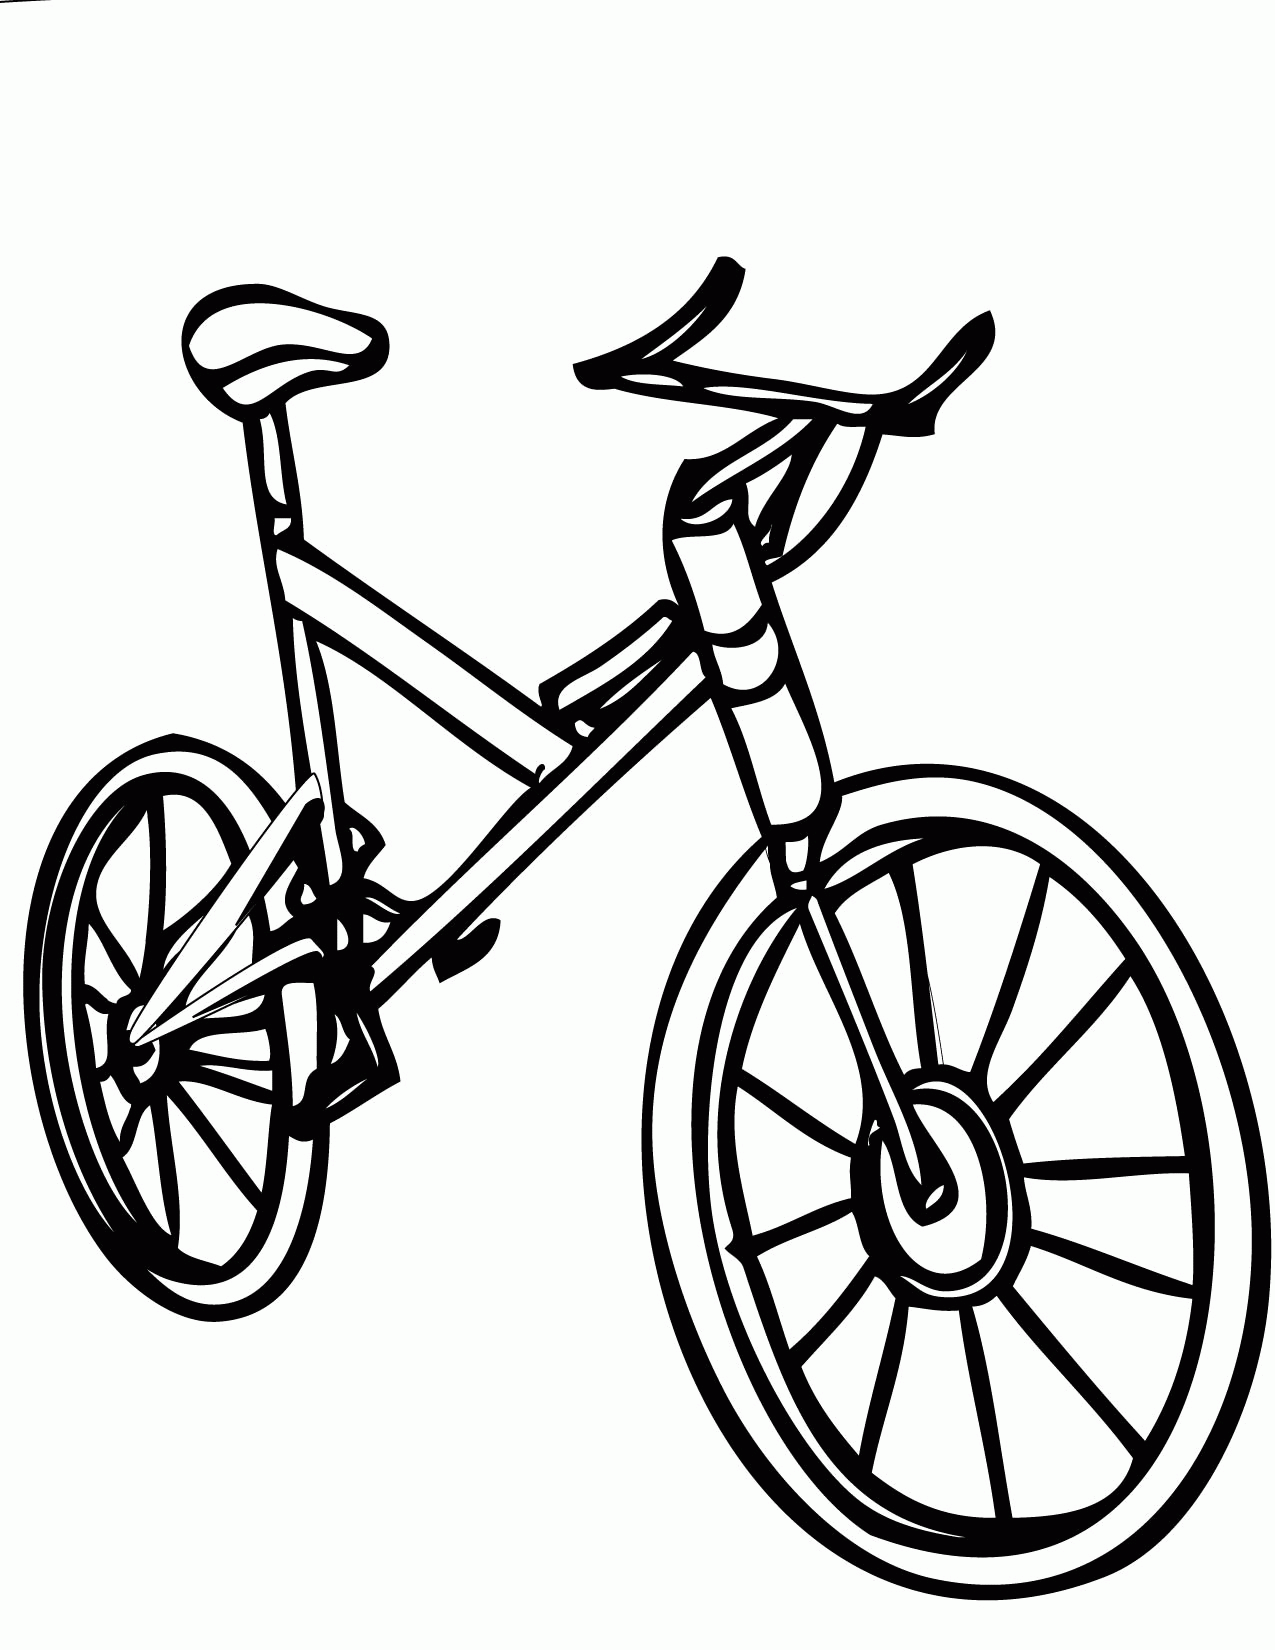 5 Best Images of Bicycle Coloring Printables - Coloring Pages ...